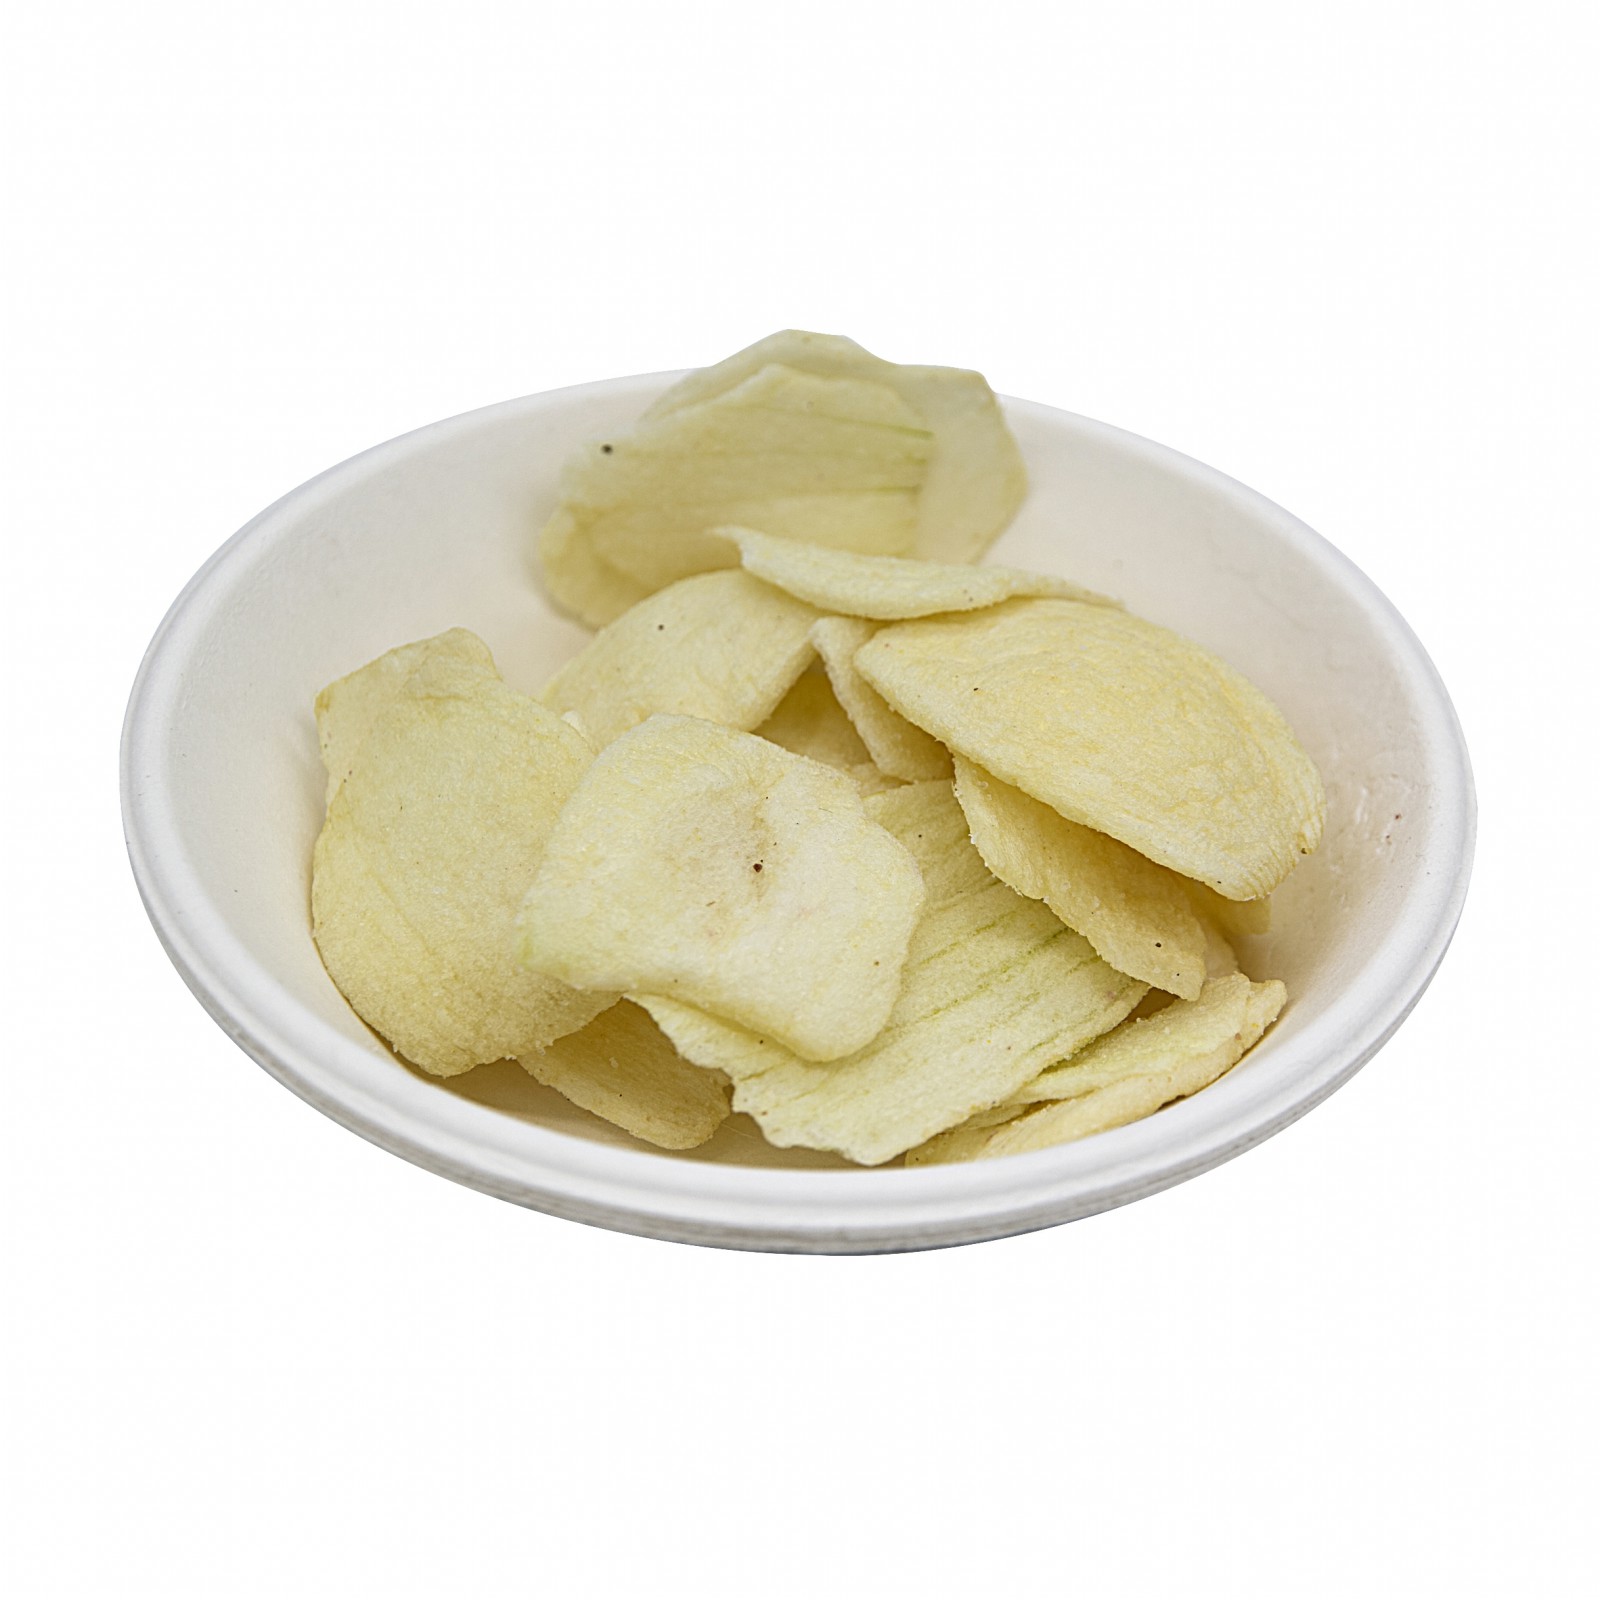 Vacuum fried onion chips